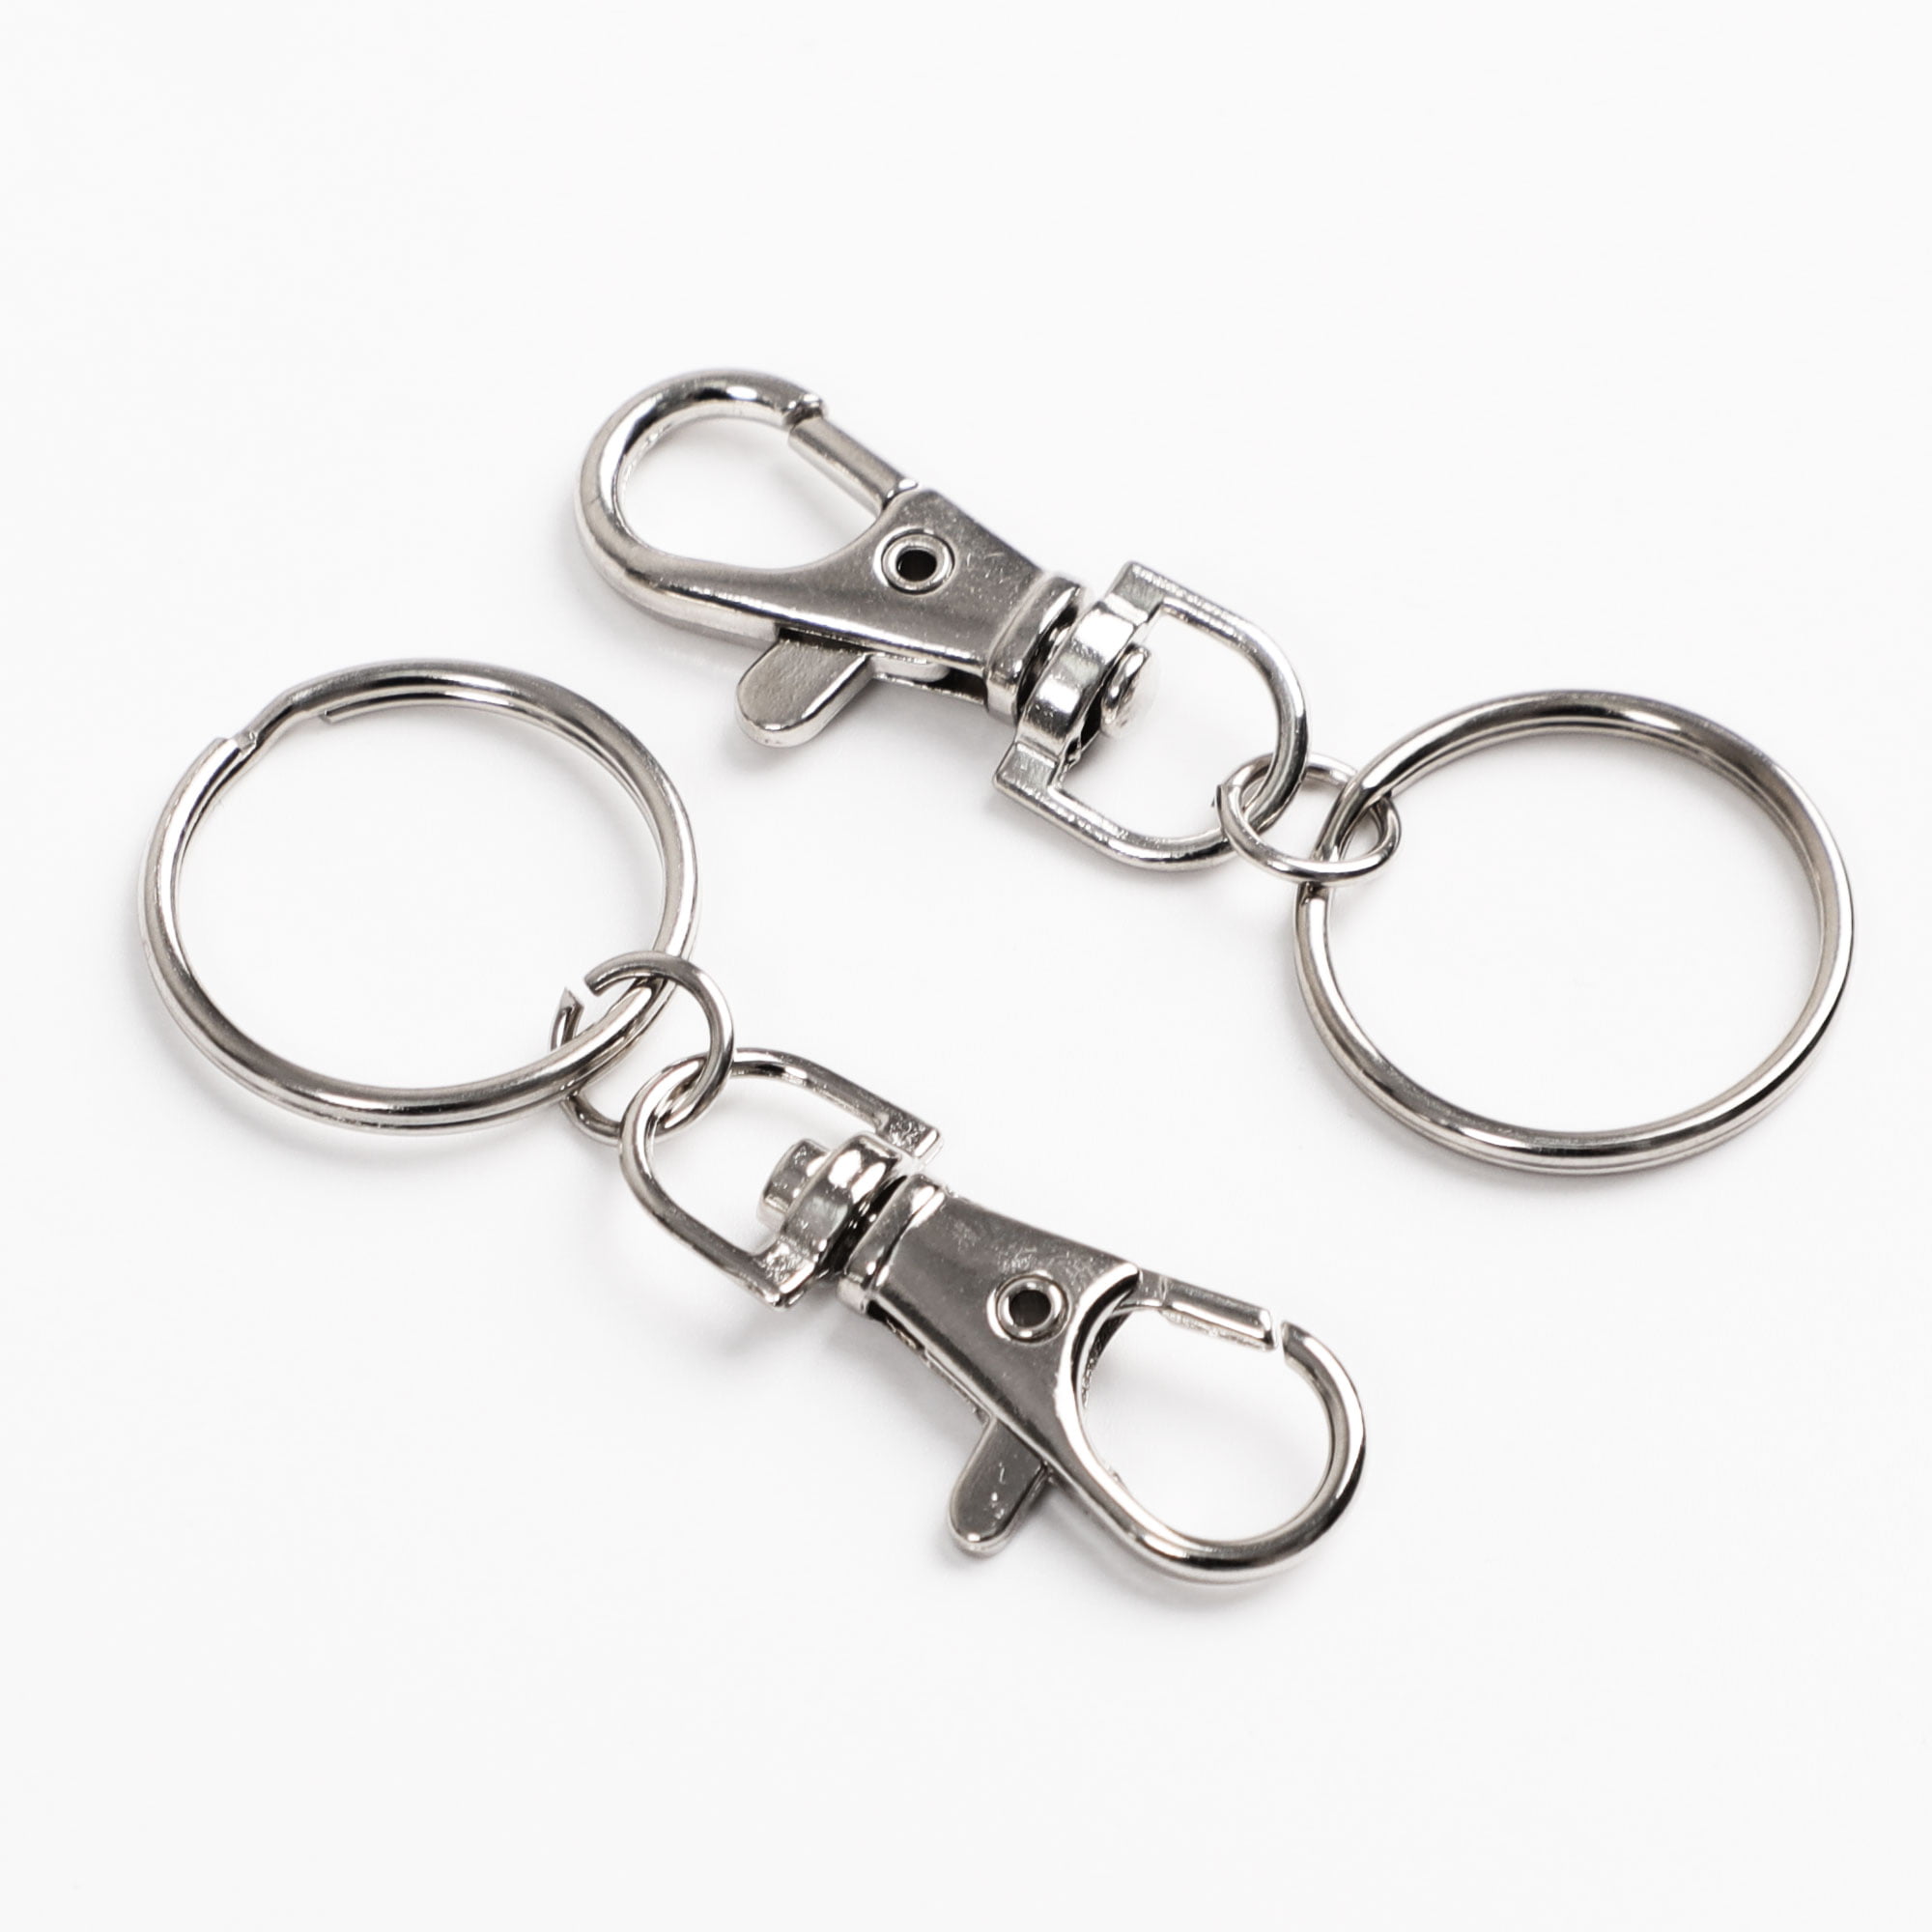 DIY Keychain Hanger Making: Snap Hook Trigger Clips With Lobster Clasp For  Necklaces And Key Rings From Swkfactory_store, $0.2